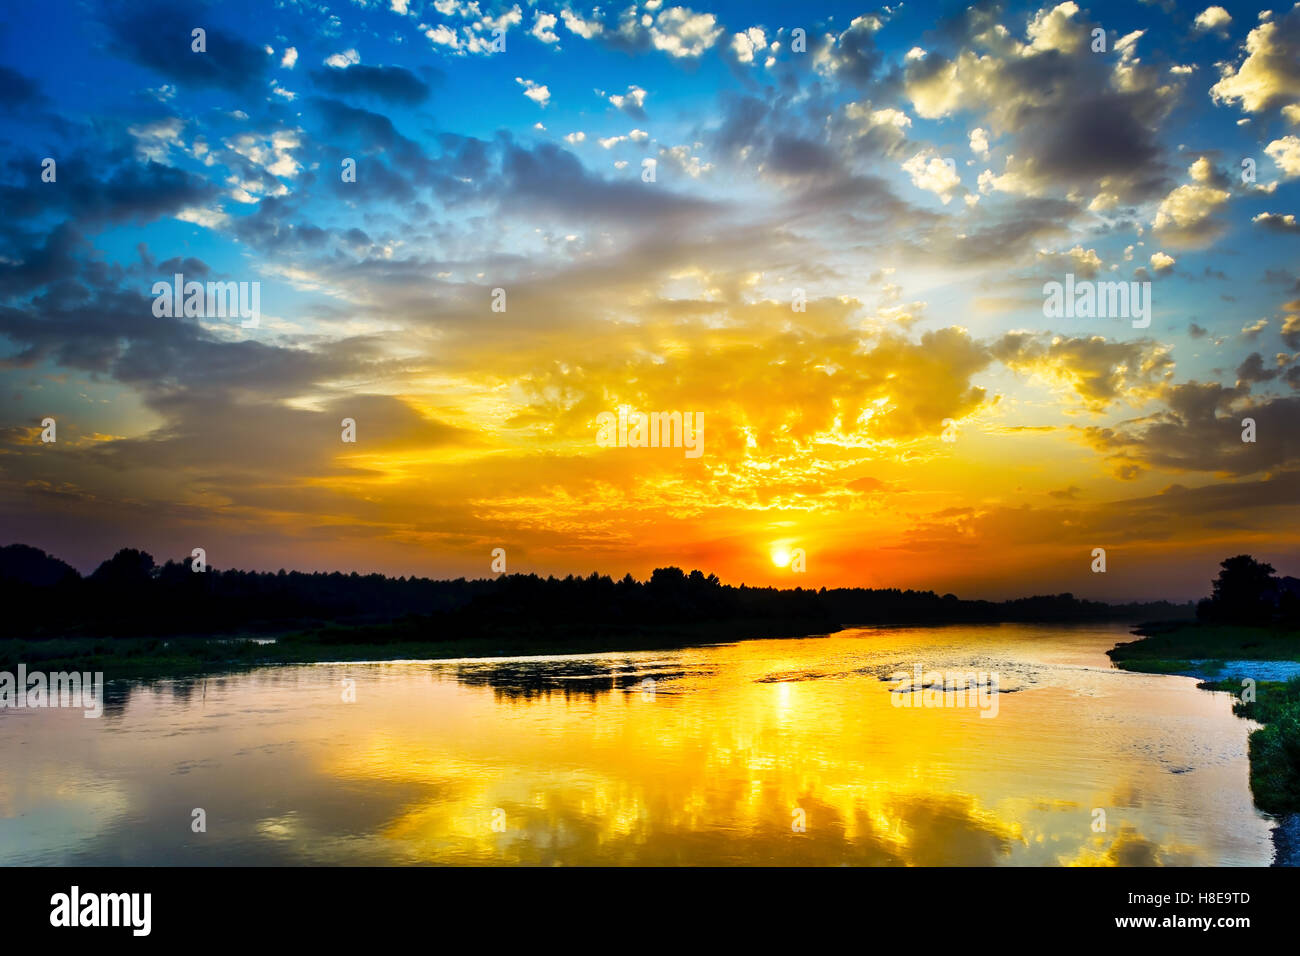 Beautiful lake landscape with vivid sunrise on the cloudy sky. River landscape. Beautiful summer landscape with golden sunset. Stock Photo